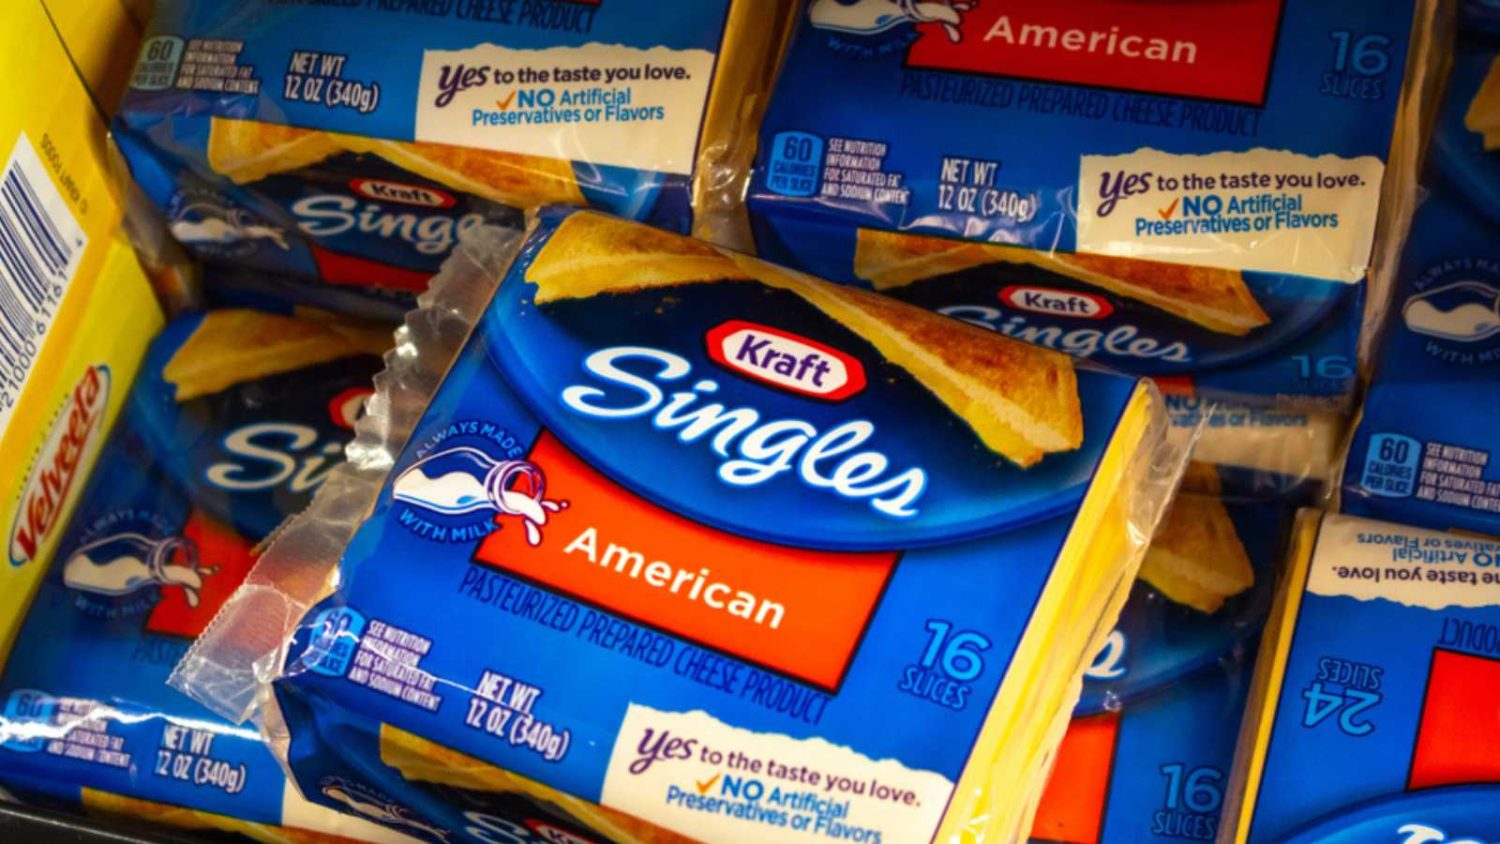 Los Angeles, California, United States - 08-09-2019: A view of several packages of Kraft Singles at the grocery store.